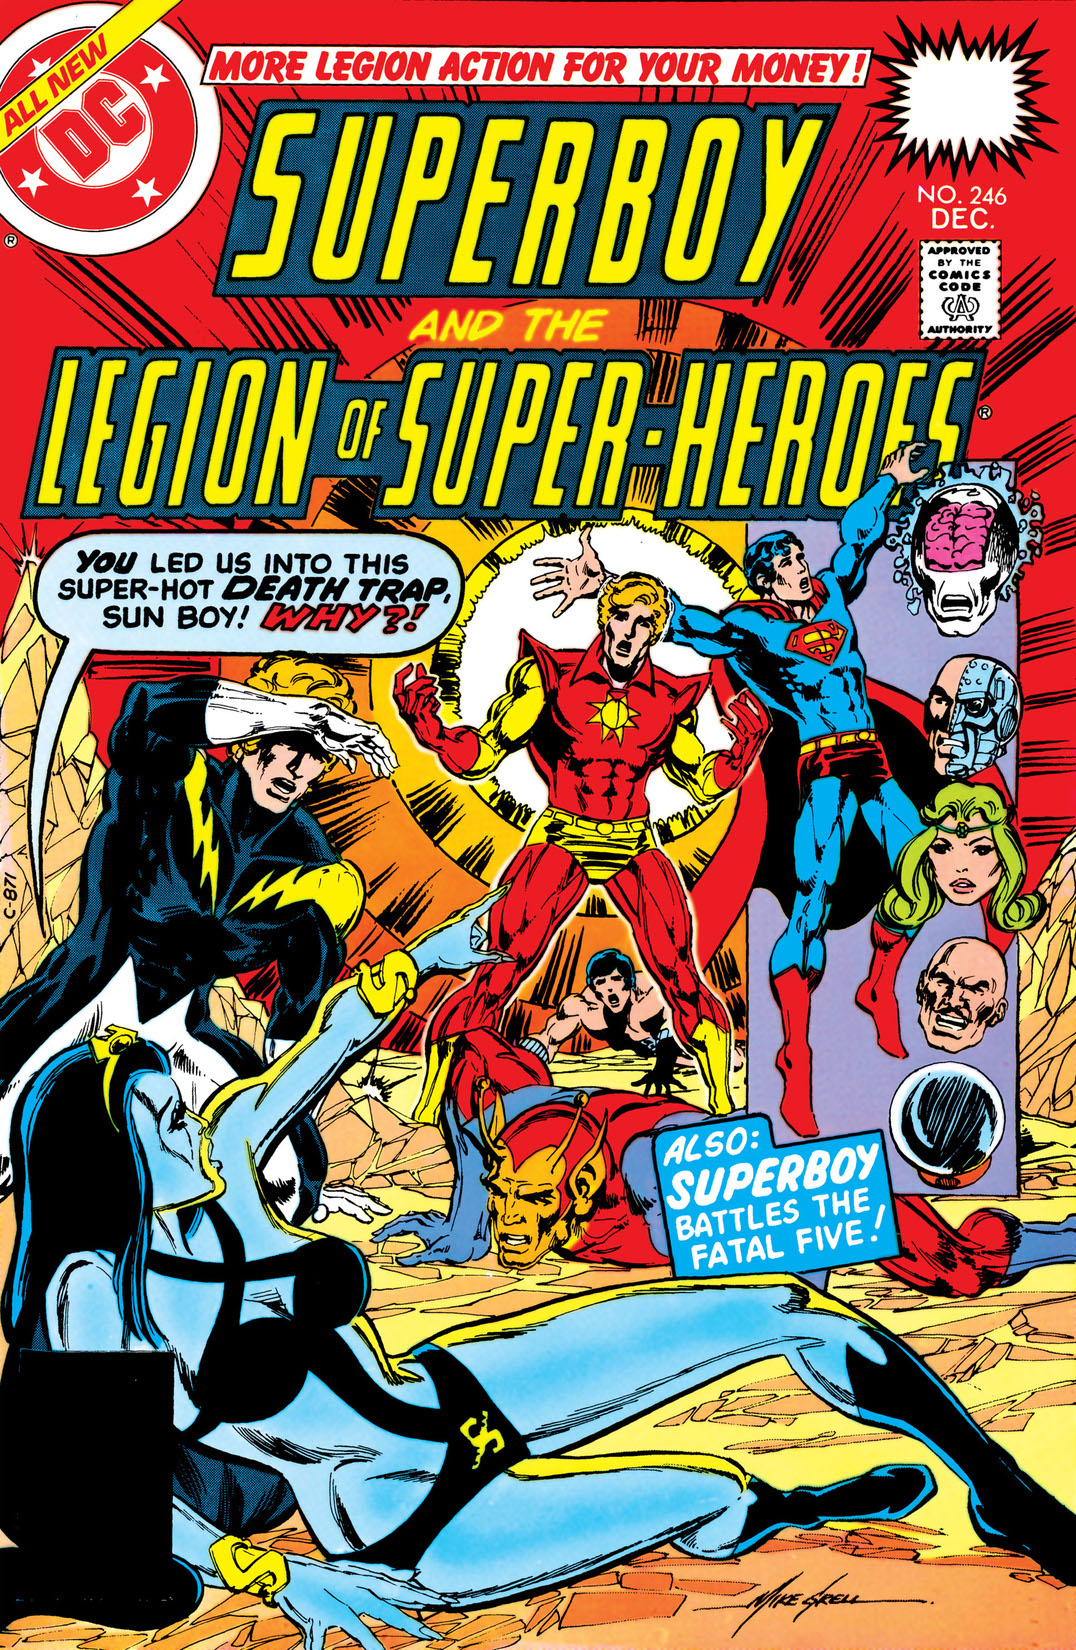 Superboy and the Legion of Super-Heroes (1977-) #246 preview images